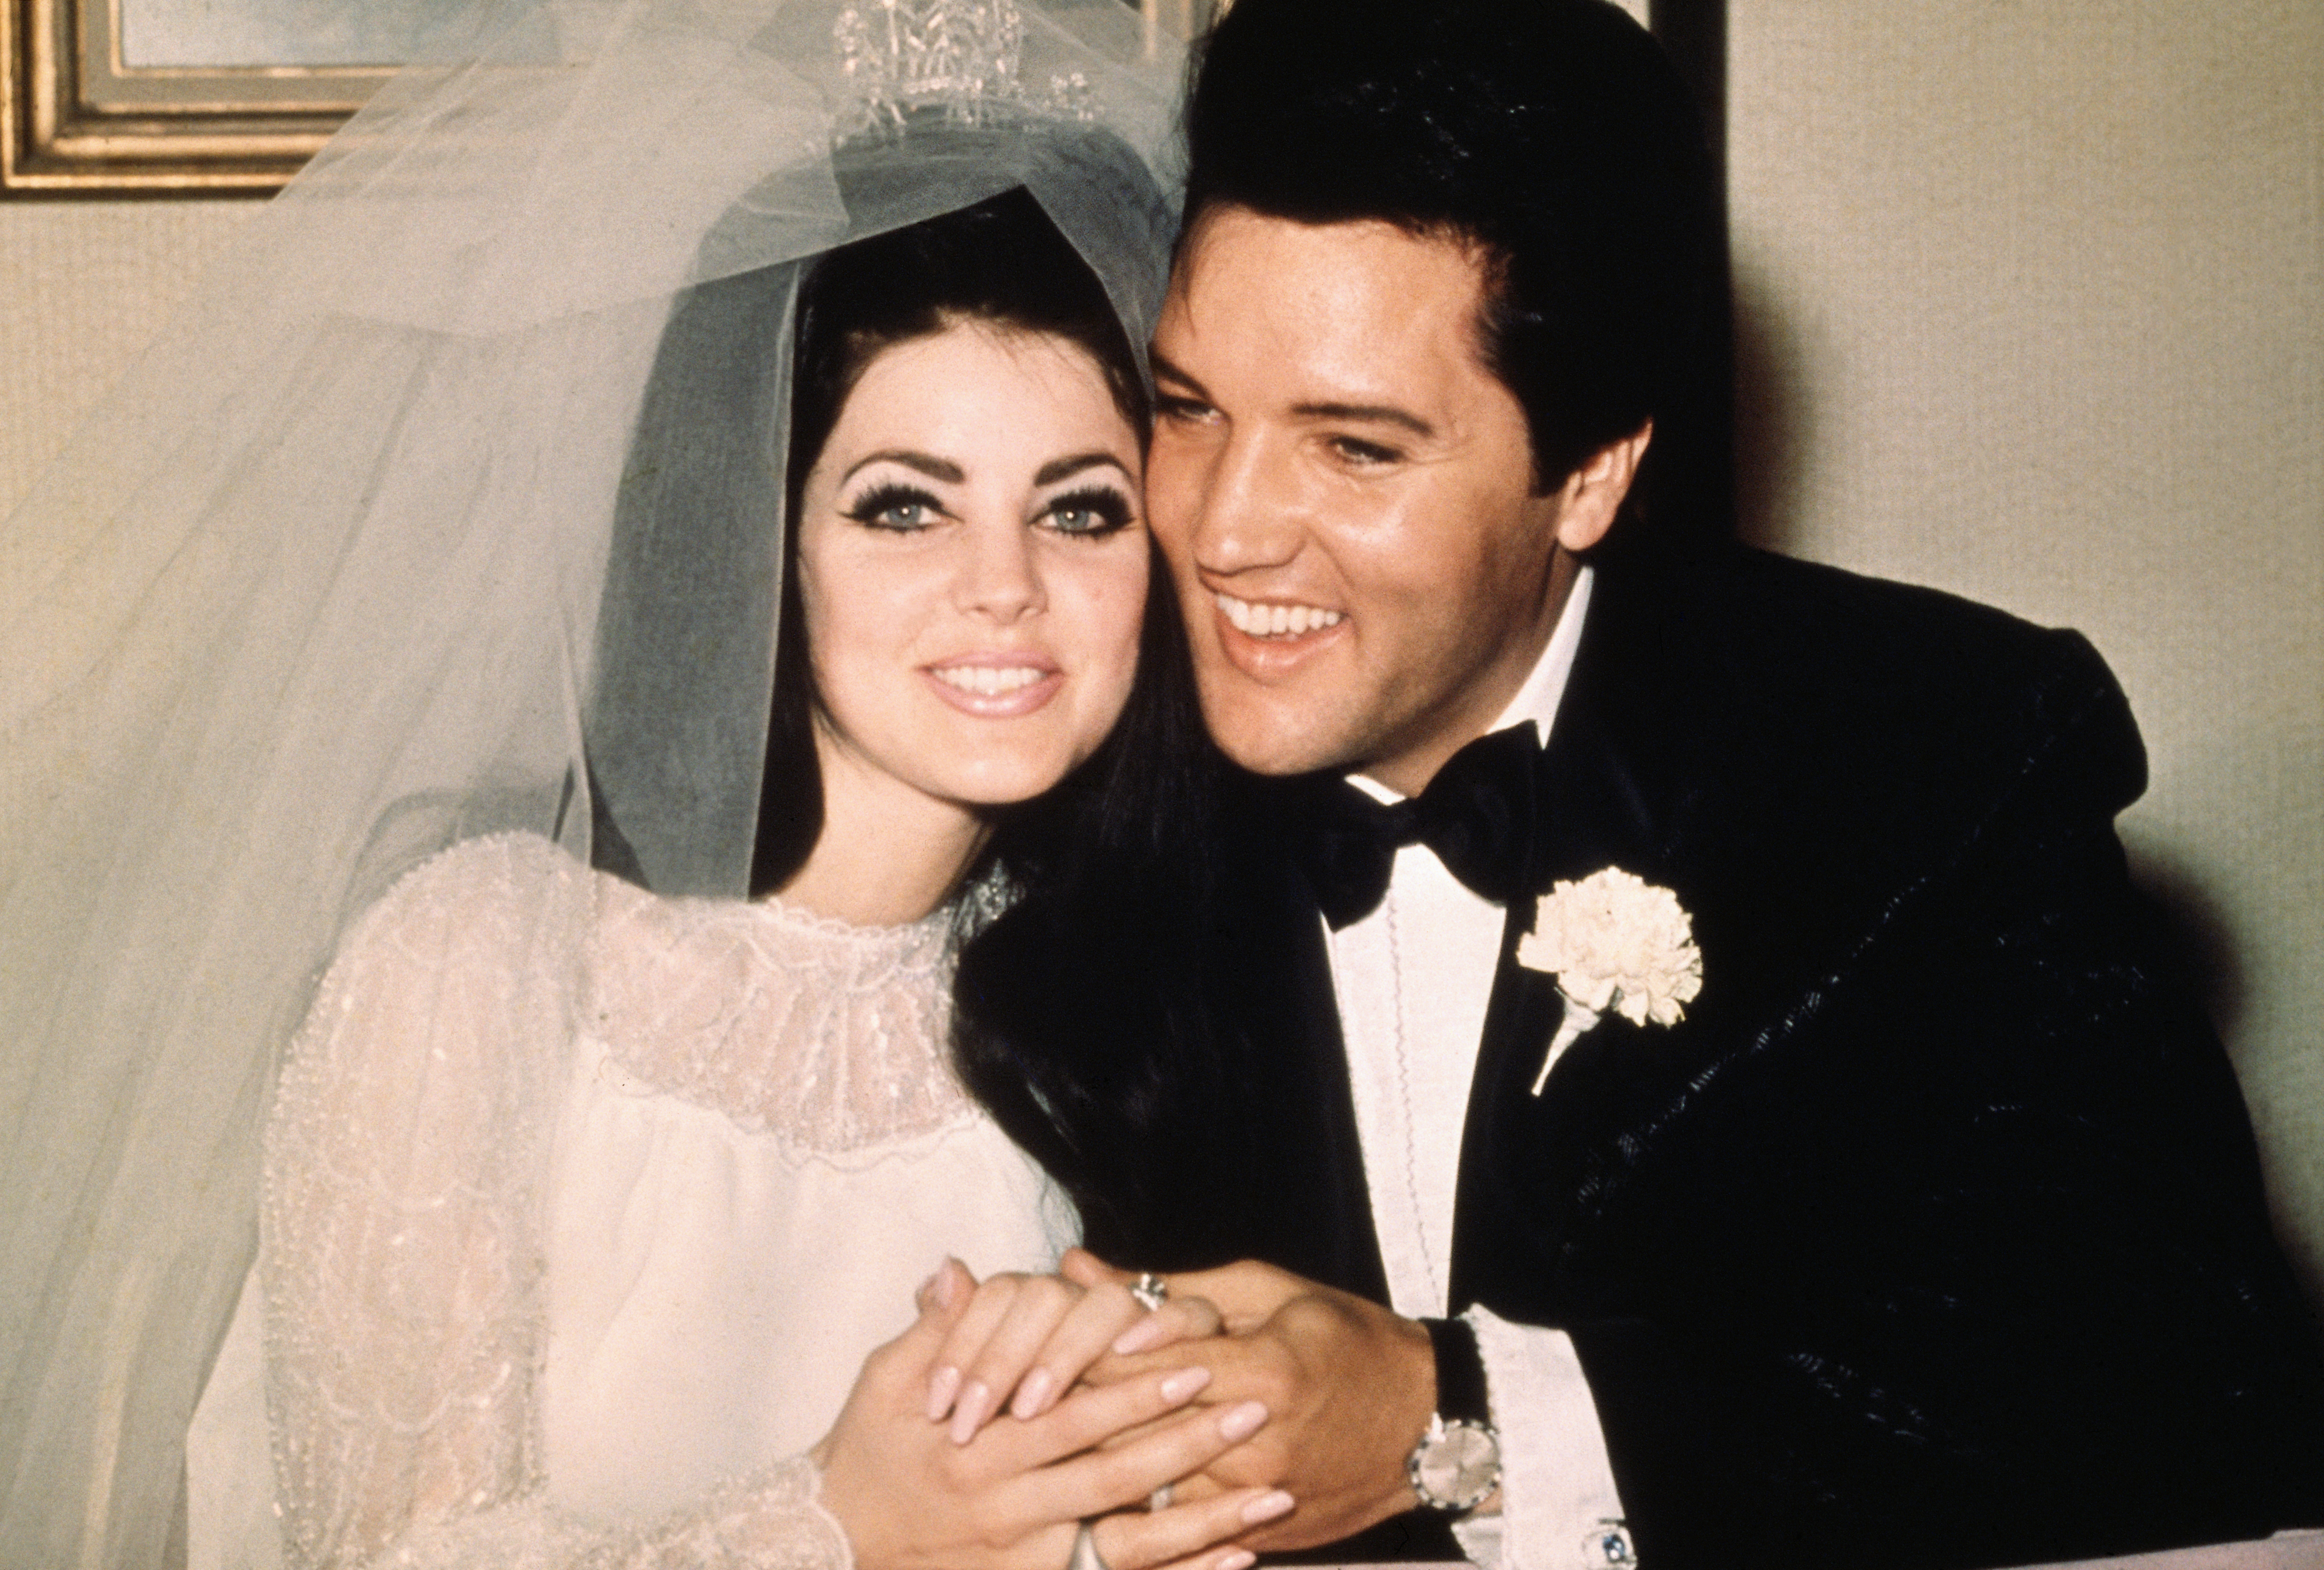 Closeup of Priscilla and Elvis Presley on their wedding day